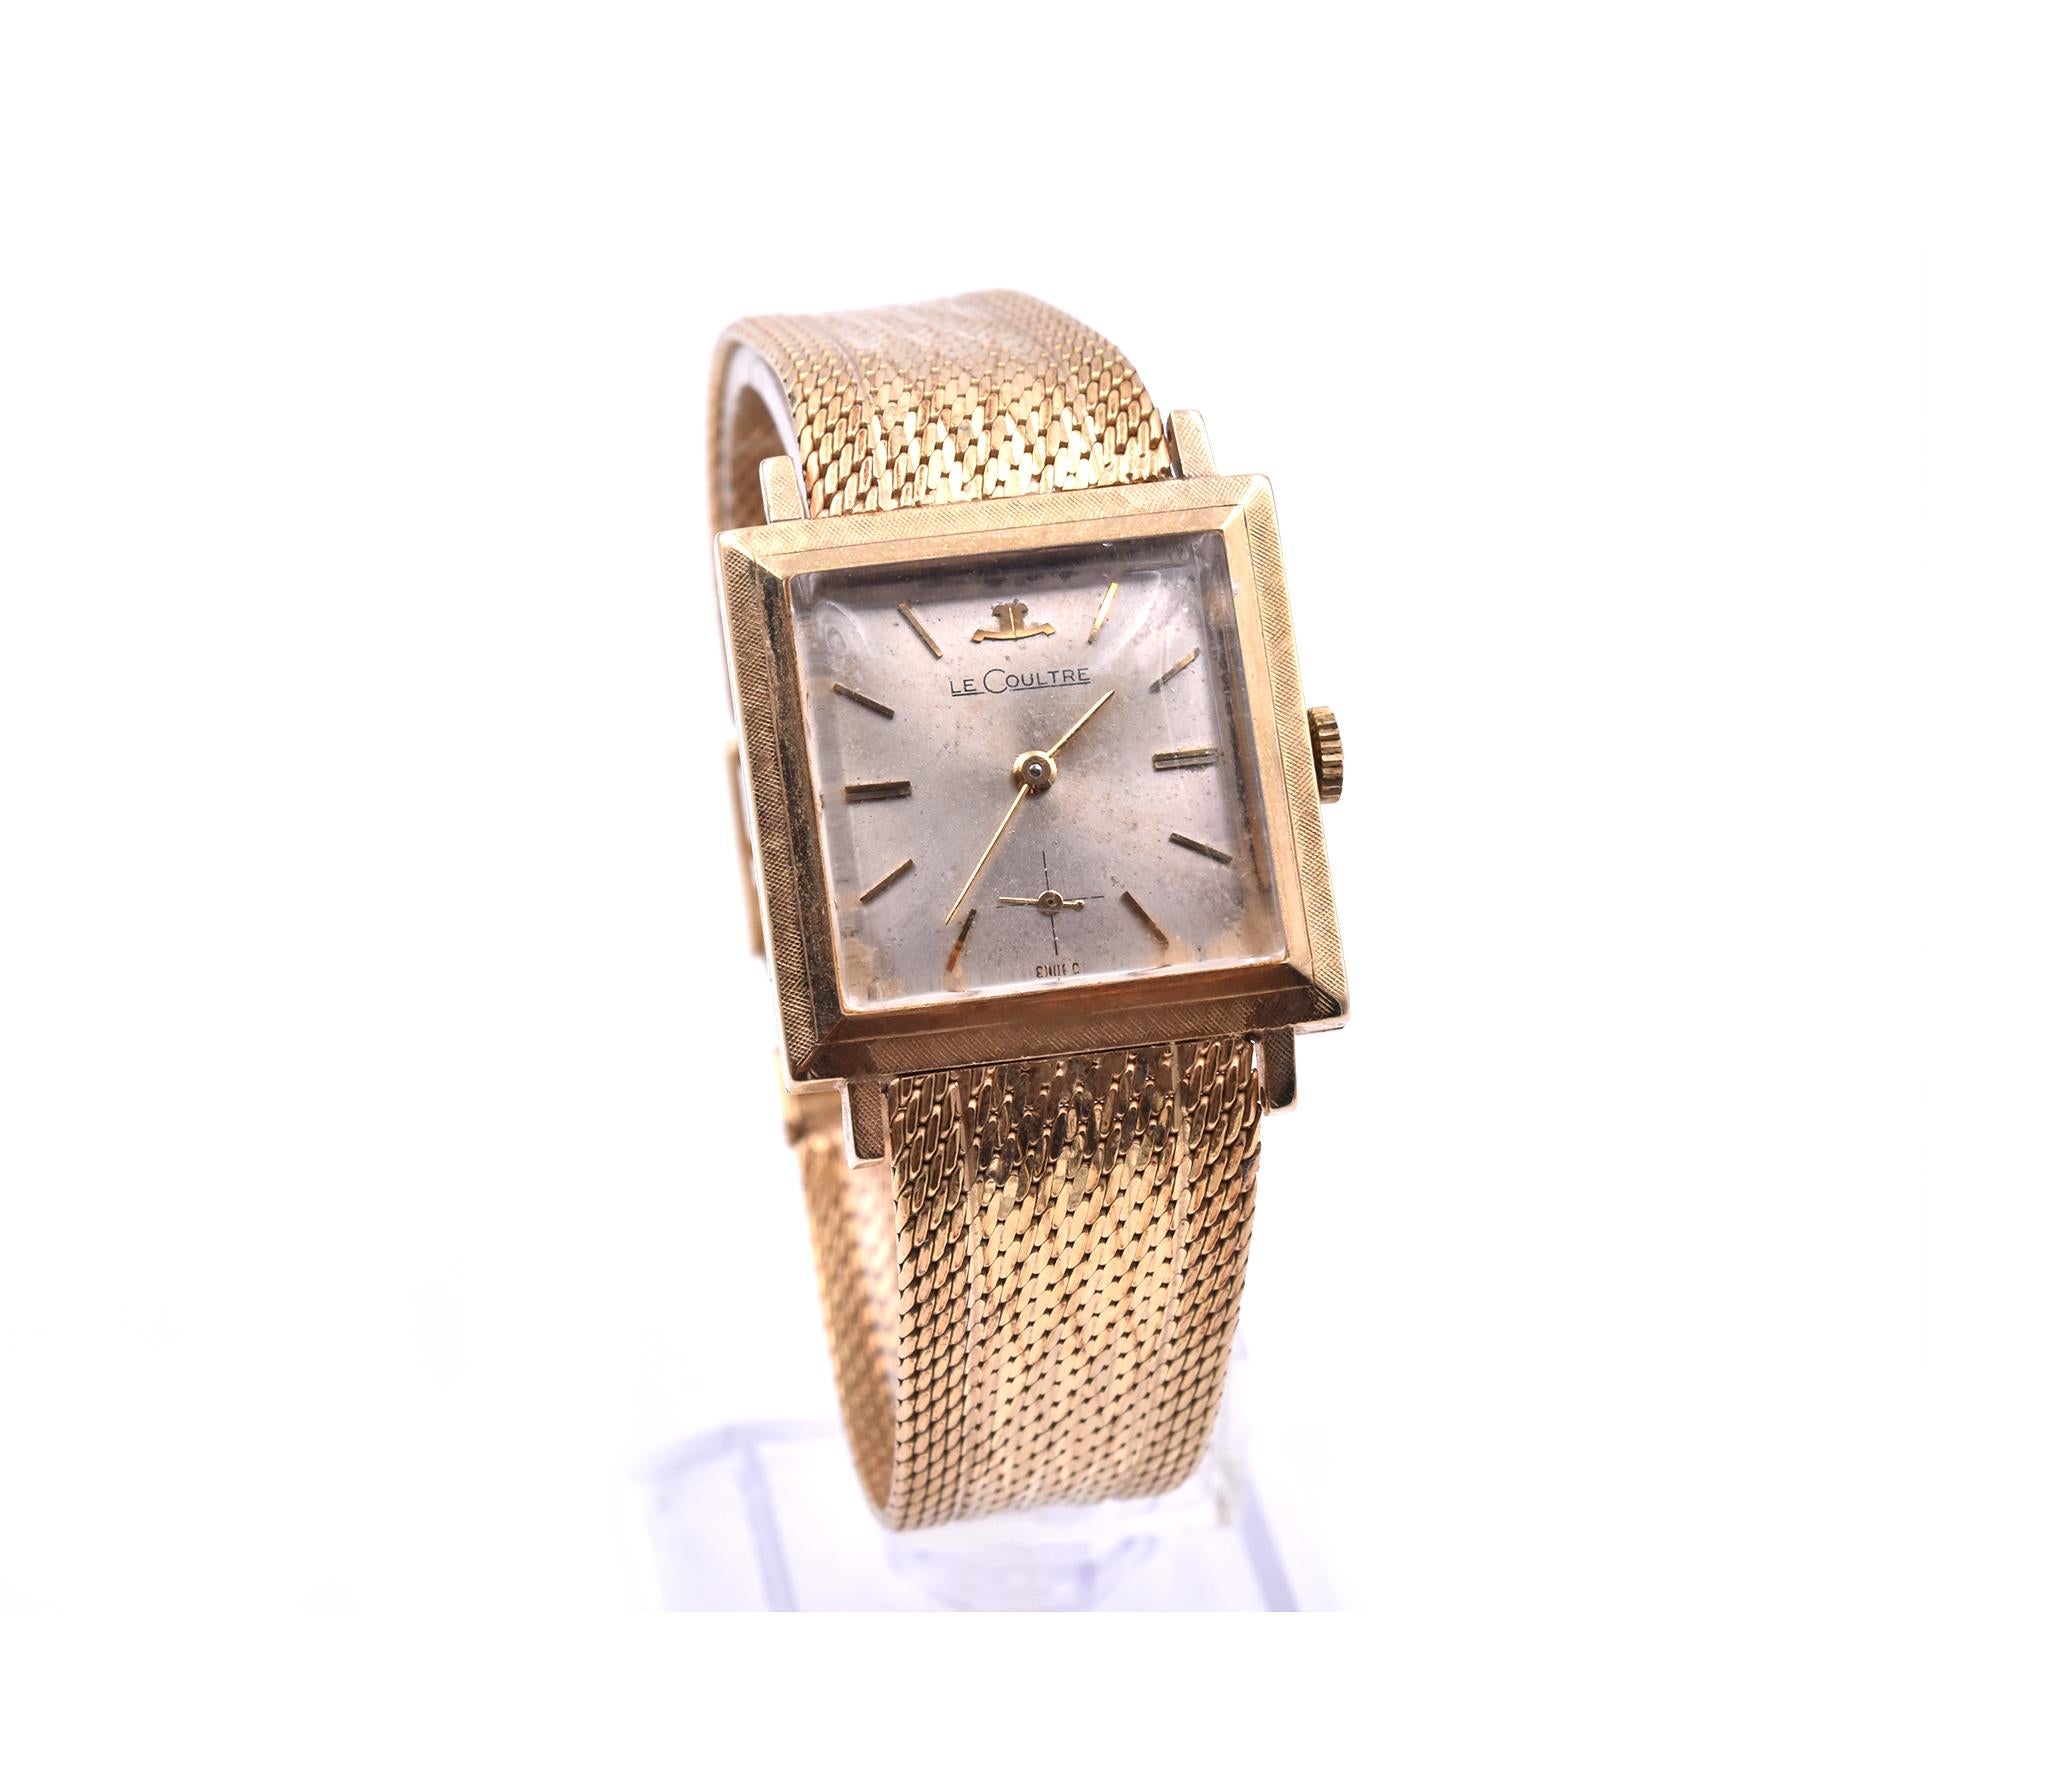 Movement: automatic
Function: hours, minutes, small seconds
Case: 26mm 14k yellow gold case, plastic protective crystal, pull/push crown, 17 jewels
Dial: silver dial with gold hands and hour markers
Bracelet: 14k yellow gold bracelet
Case#: